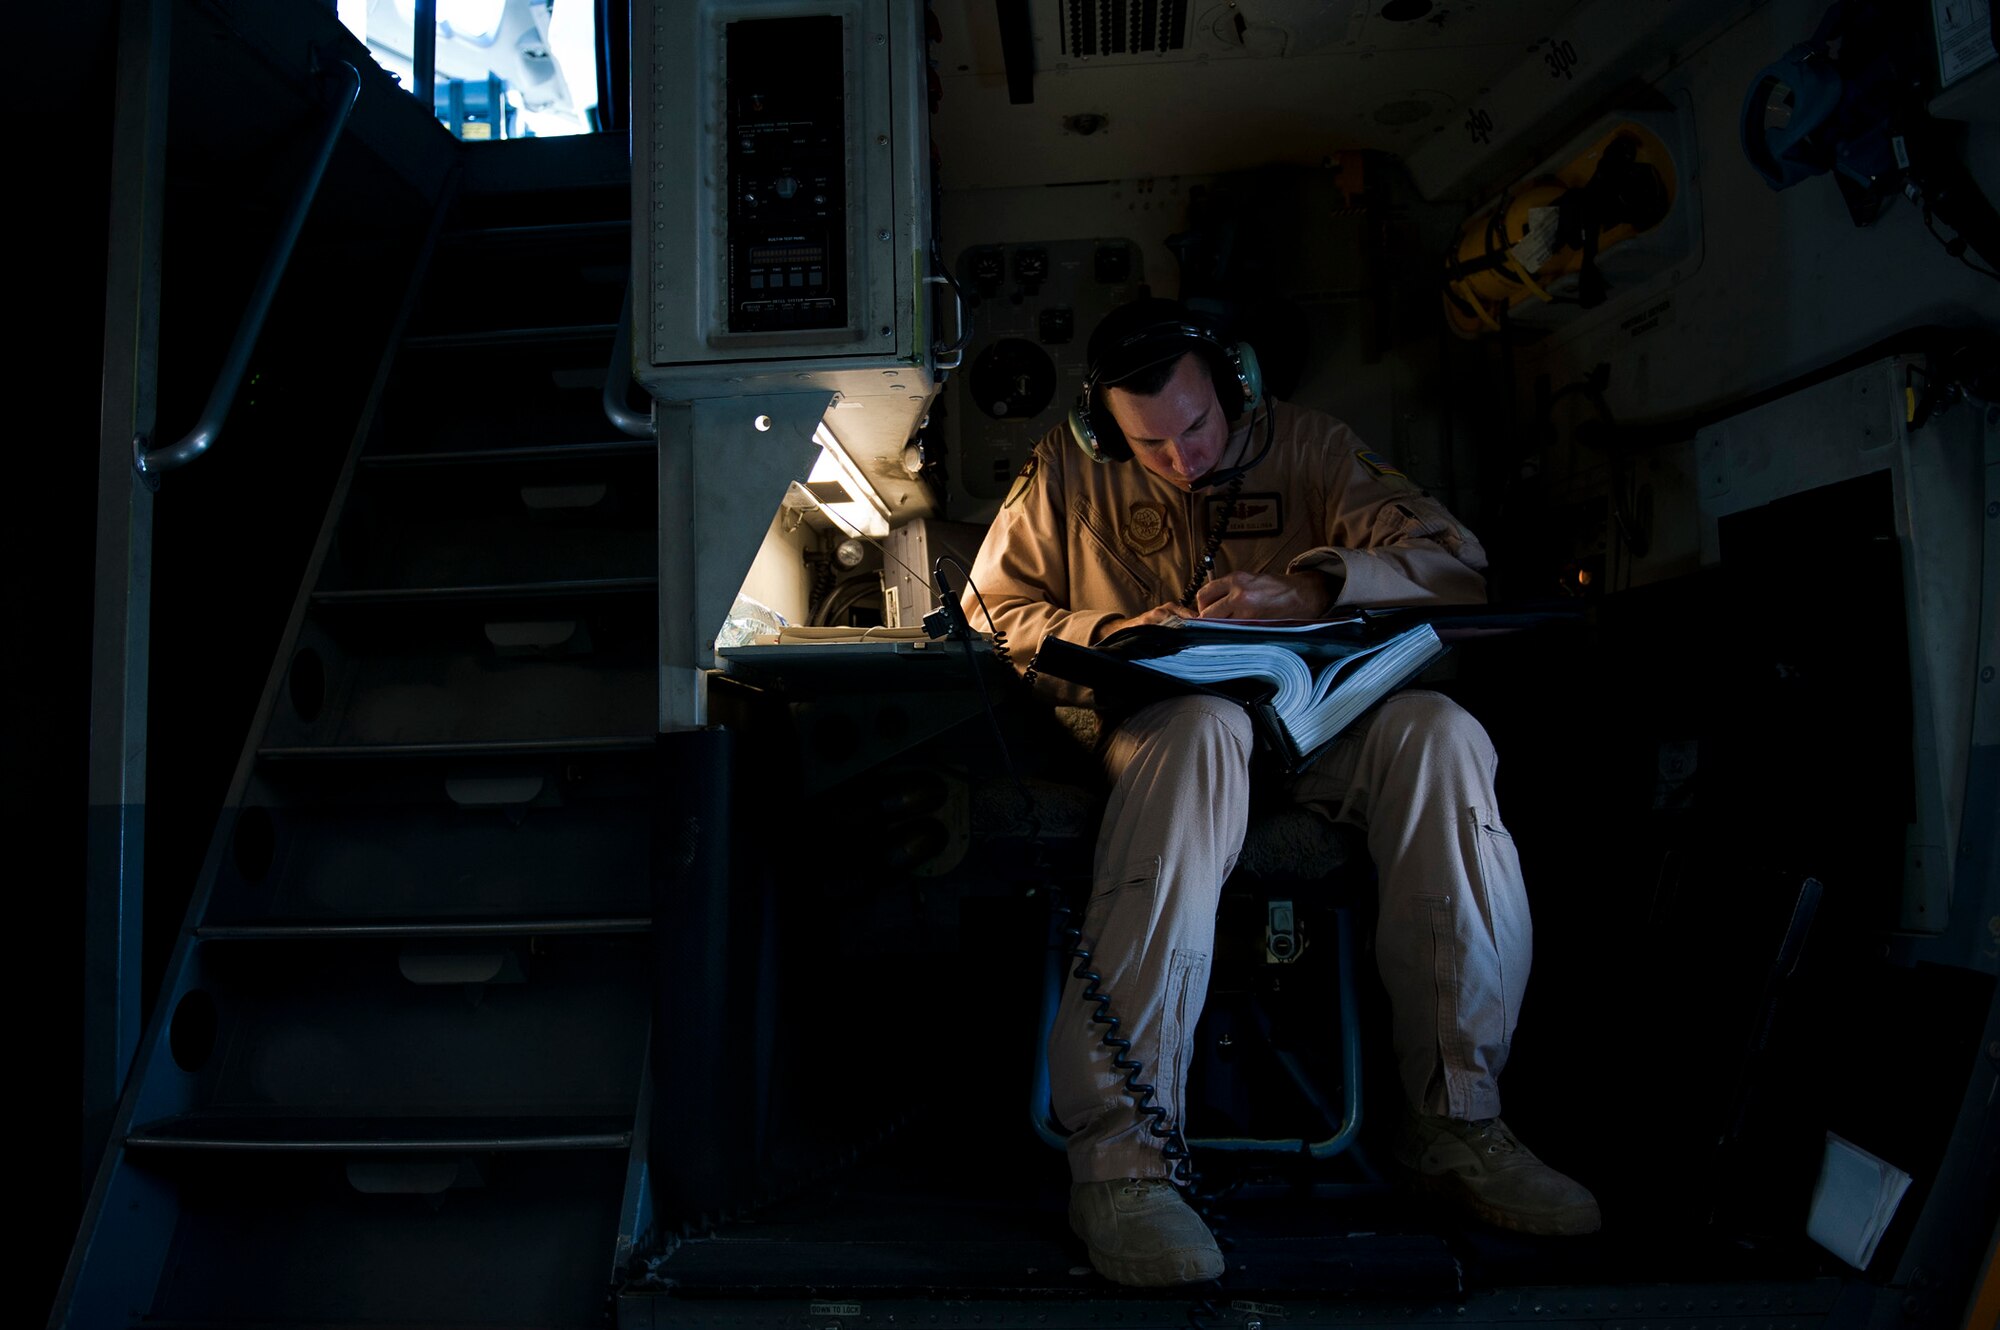 Staff Sgt. Sean Sullivan, an 817th Expeditionary Airlift Squadron loadmaster, annotates mechanical discrepancies onboard a C-17 Globemaster III aircraft Aug. 18, 2011, while flying over Afghanistan. The crew transported equipment and supplies from Incirlik Air Base, Turkey, to Kandahar Air Field, Afghanistan. (U.S. Air Force photo by Tech. Sgt. Michael B. Keller/Released)